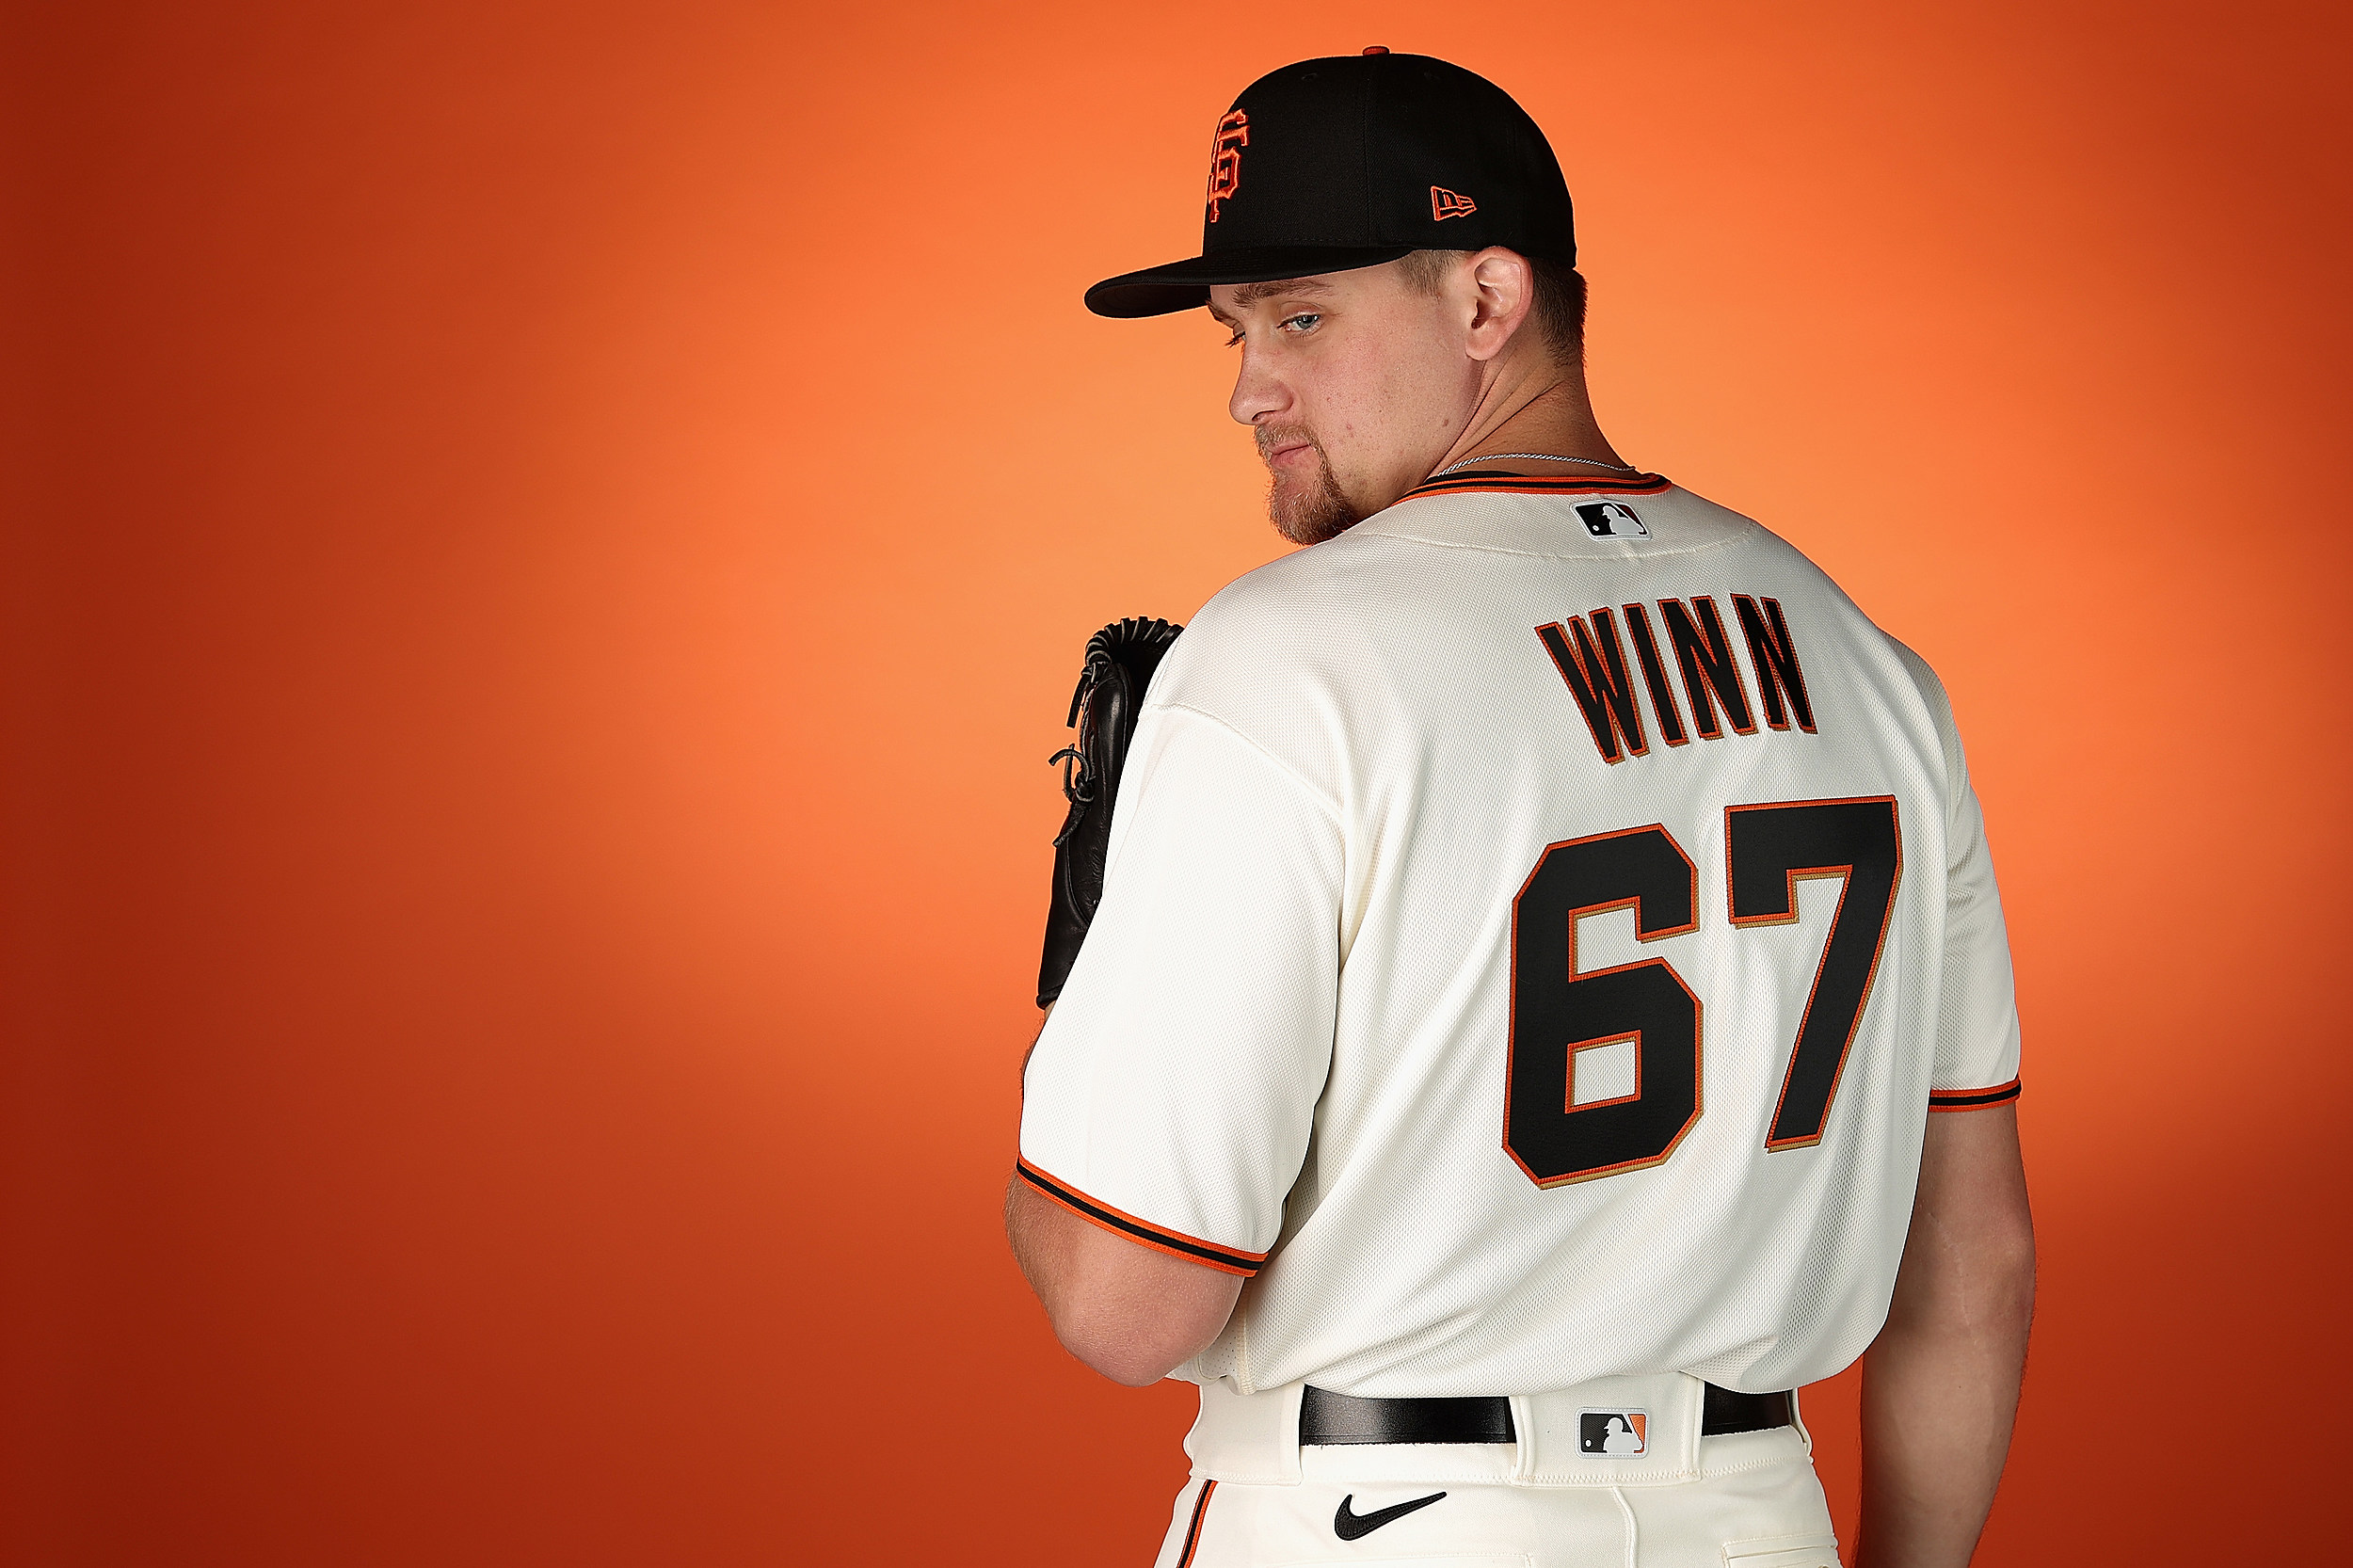 San Francisco Giants - 2016 Game-Used Road Jersey - Worn by #15